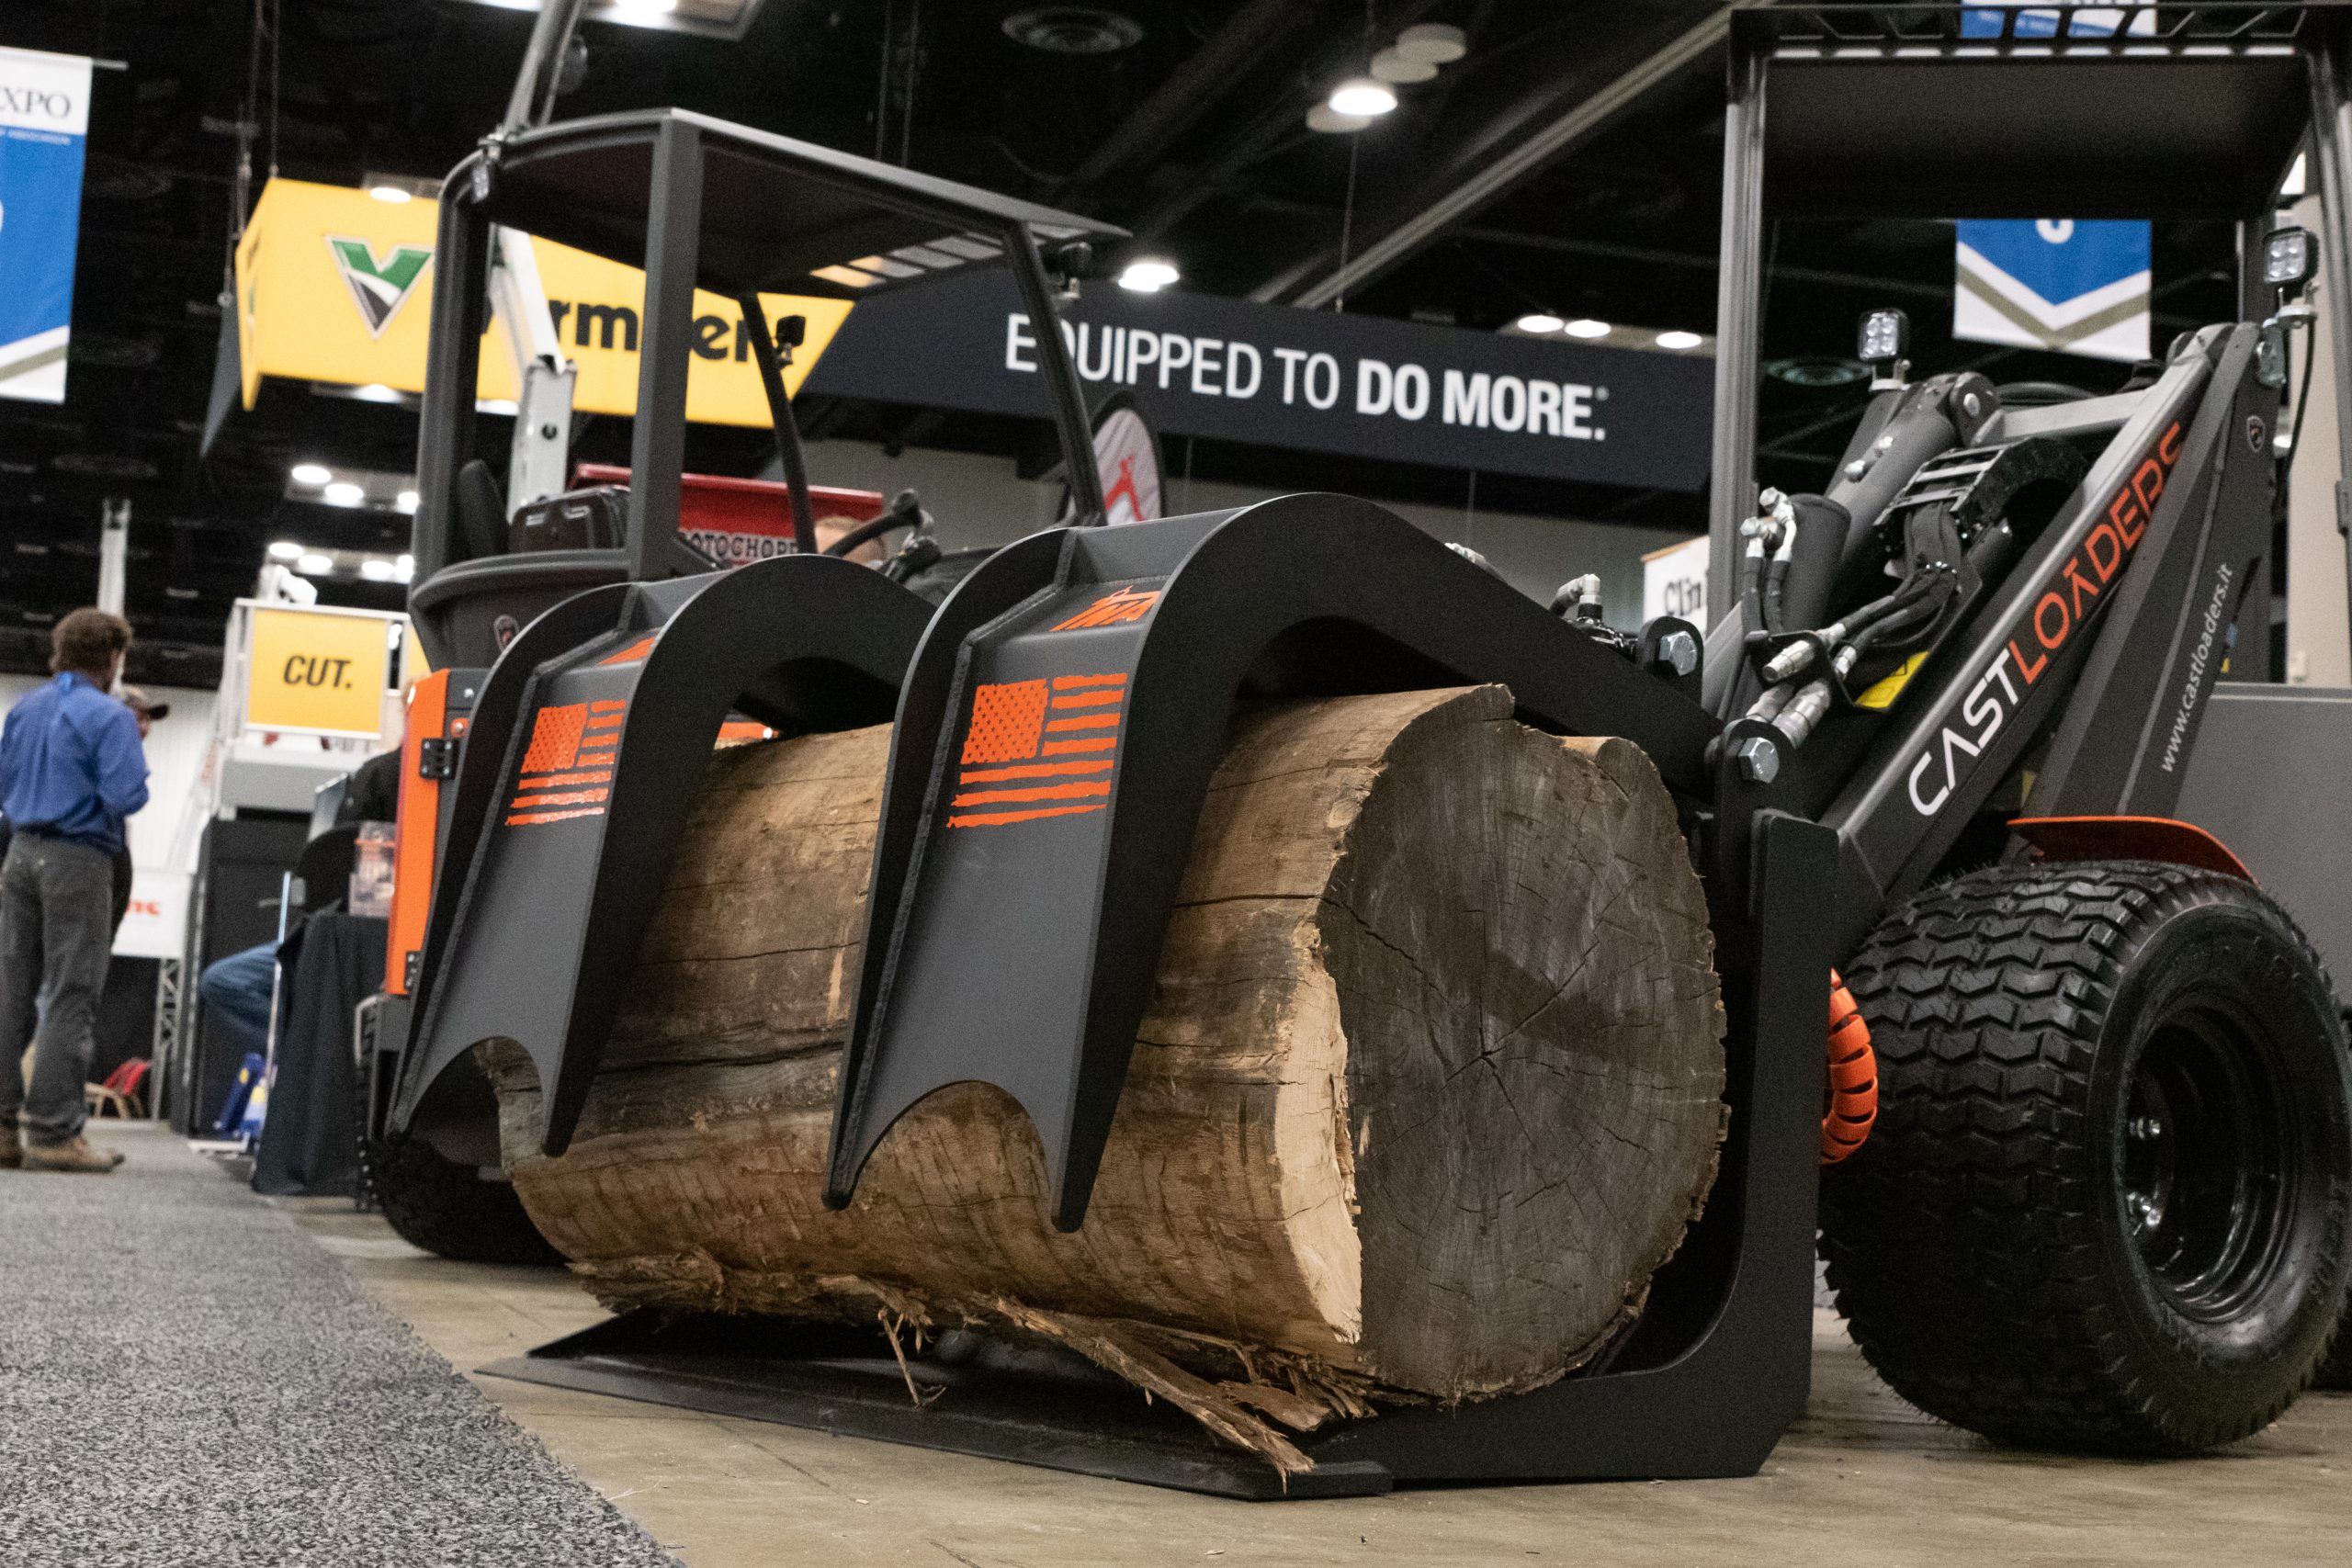 TNAttachments unveiled the new TNA Grapple Bucket at TCI EXPO'21 in Indianapolis, Indiana